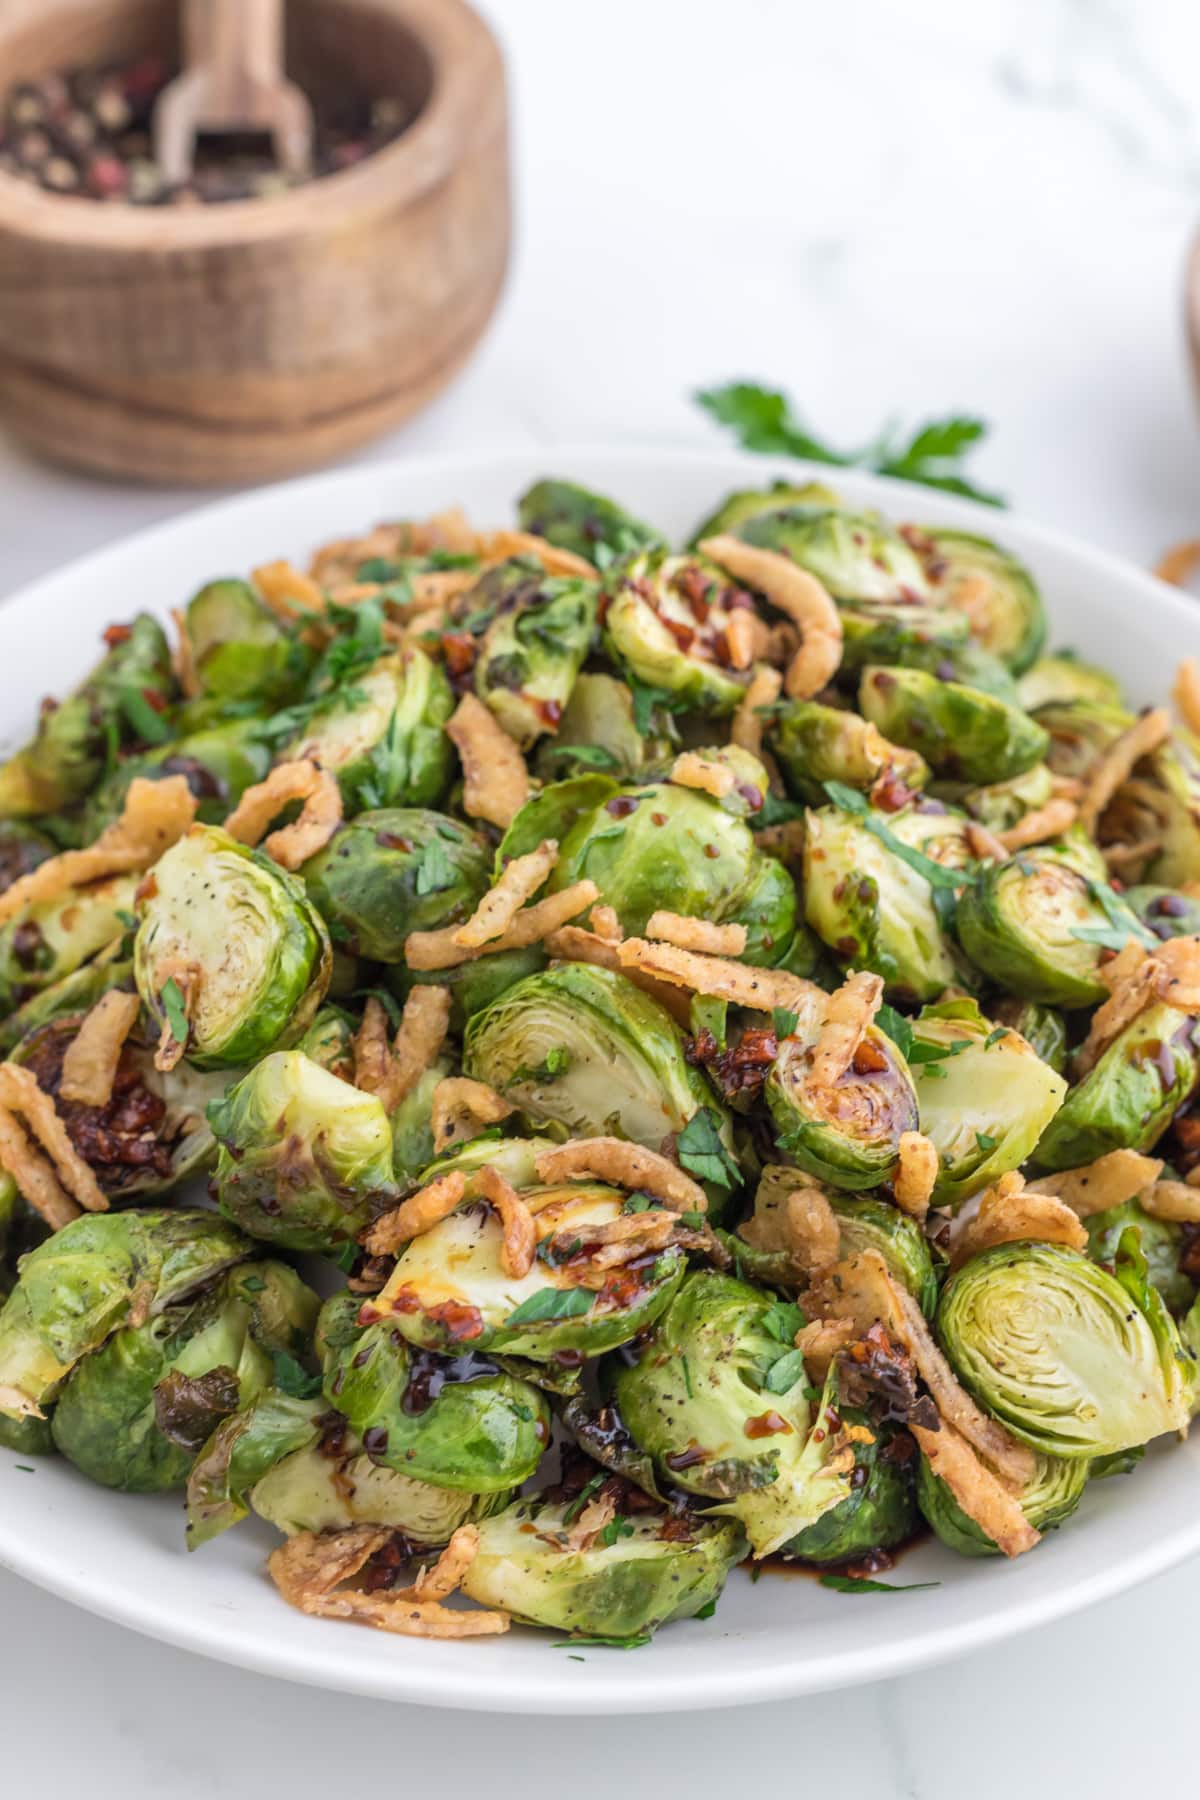 A large platter filled with roasted brussels sprouts and topped with crispy fried onions.